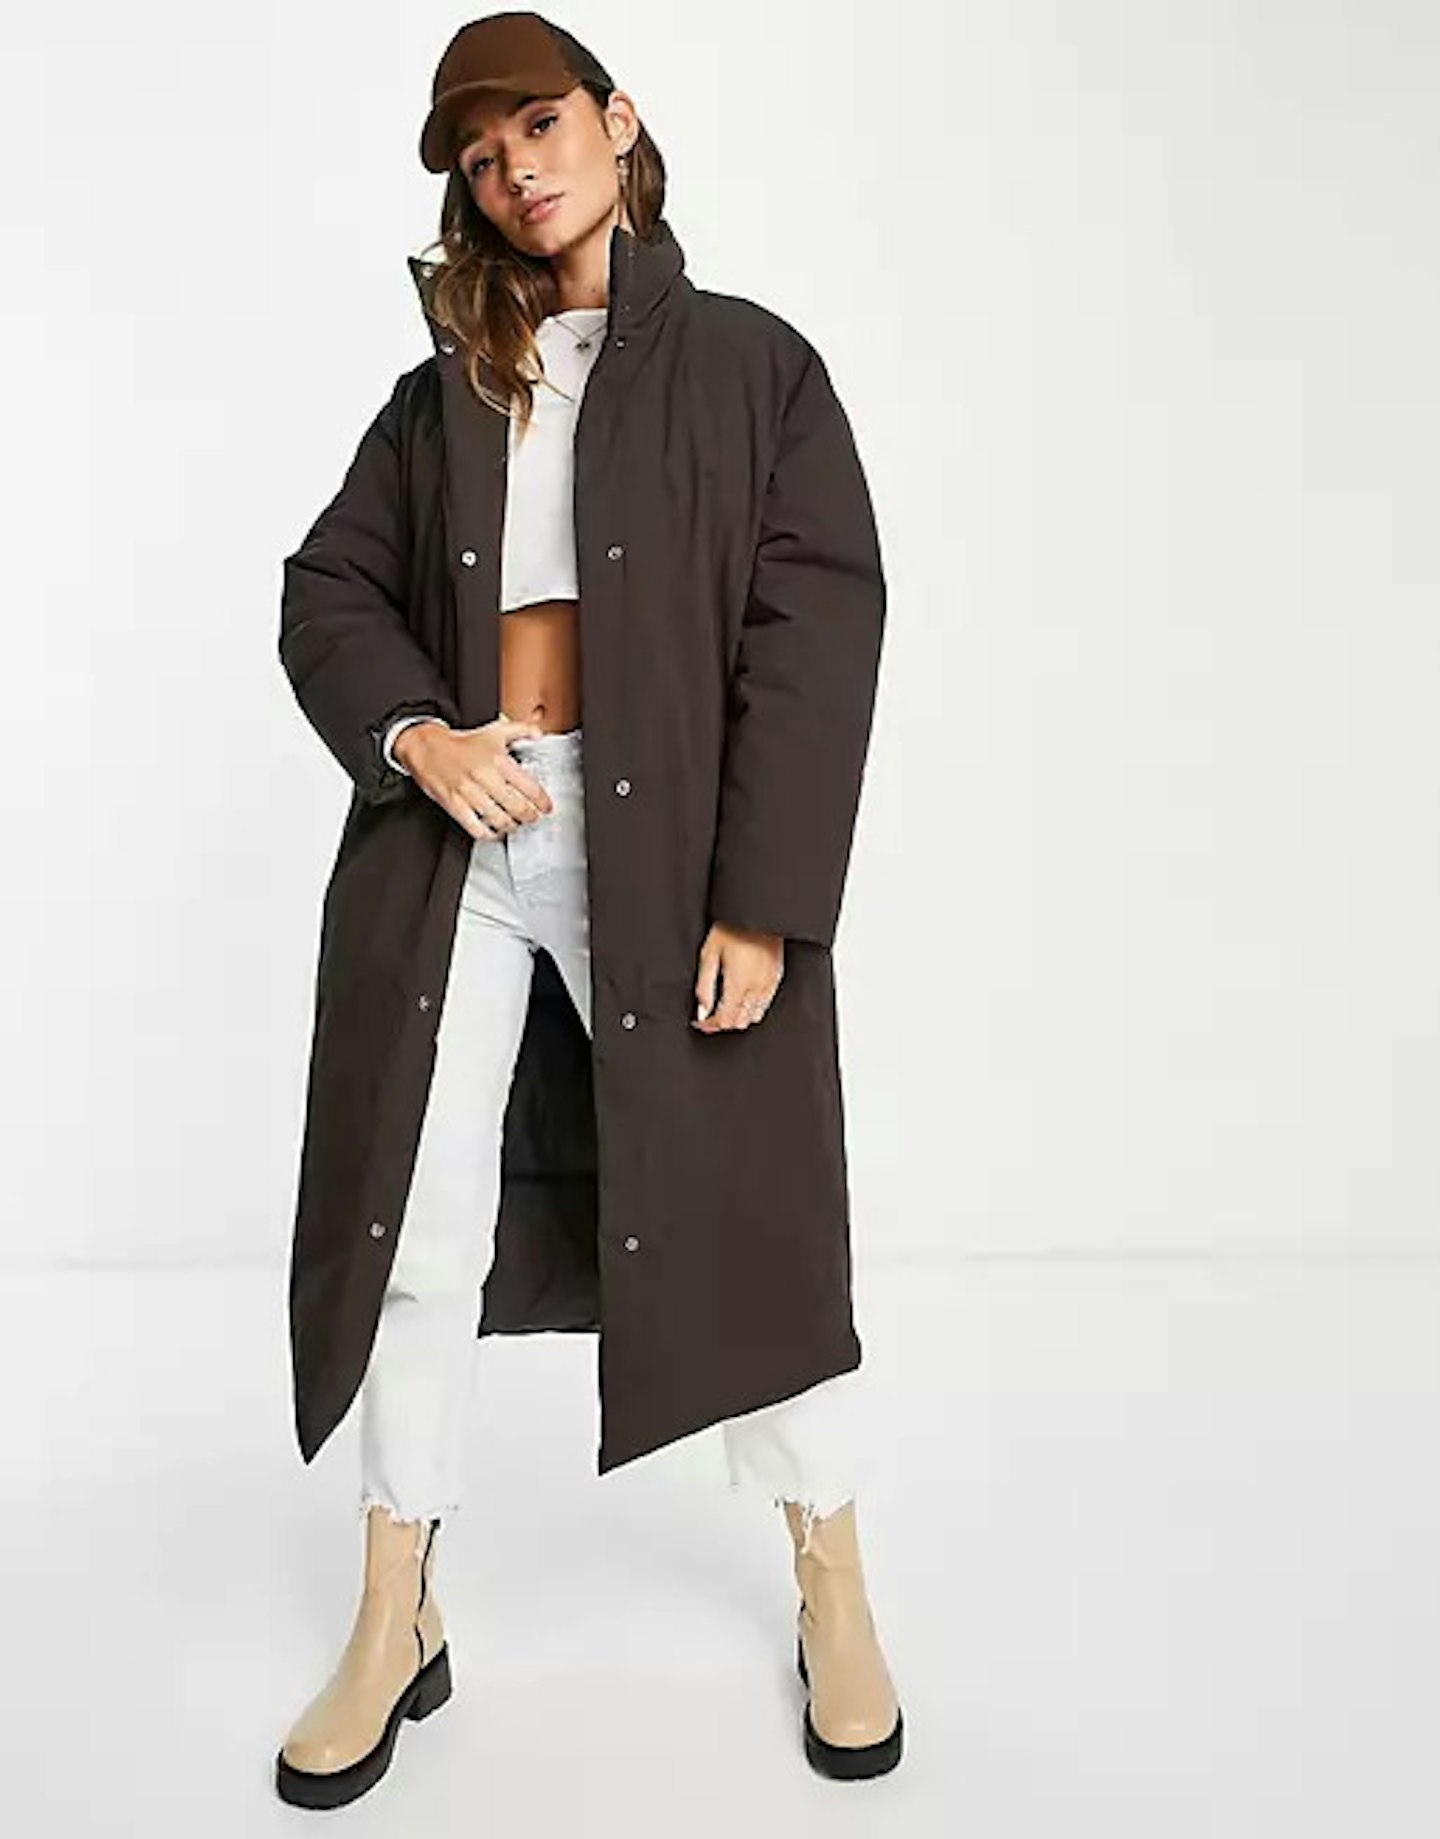 ASOS Design, oversized maxi puffer jacket in brown, WAS £75 NOW £60